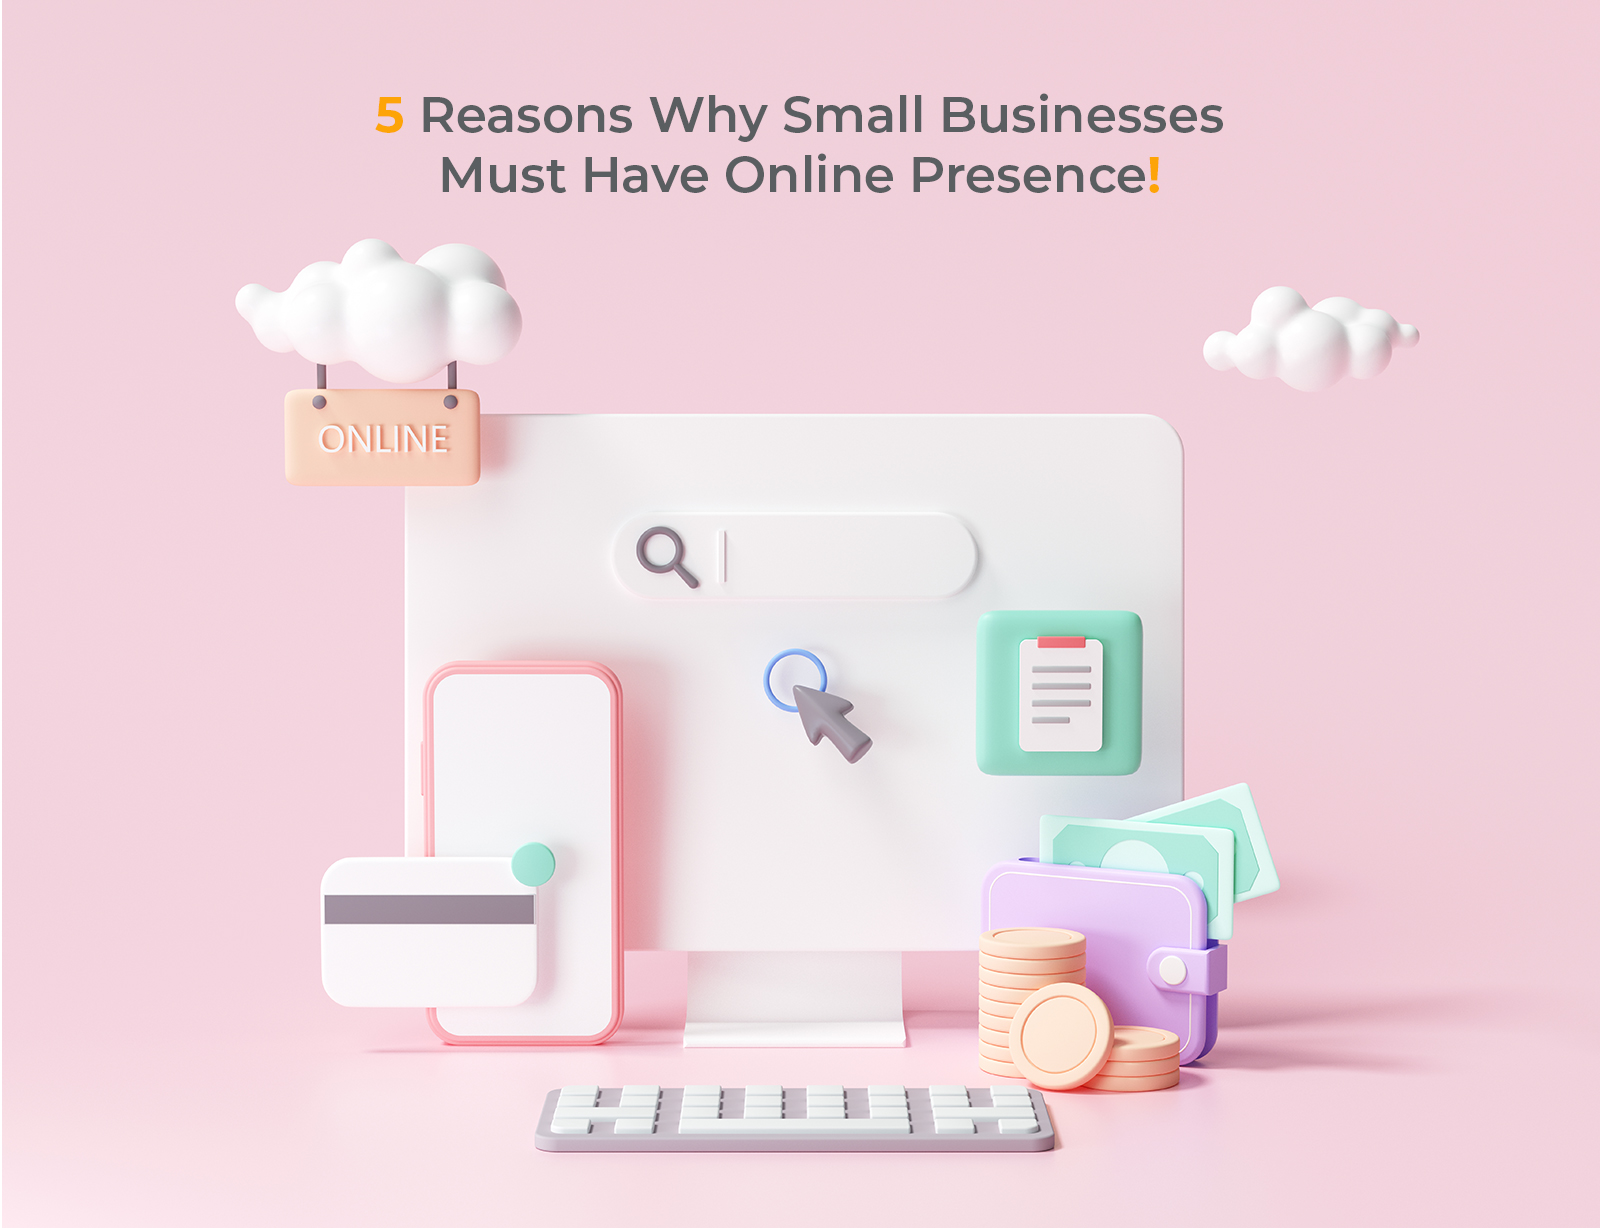 5 Reasons Why Small Businesses Must Have Online Presence!